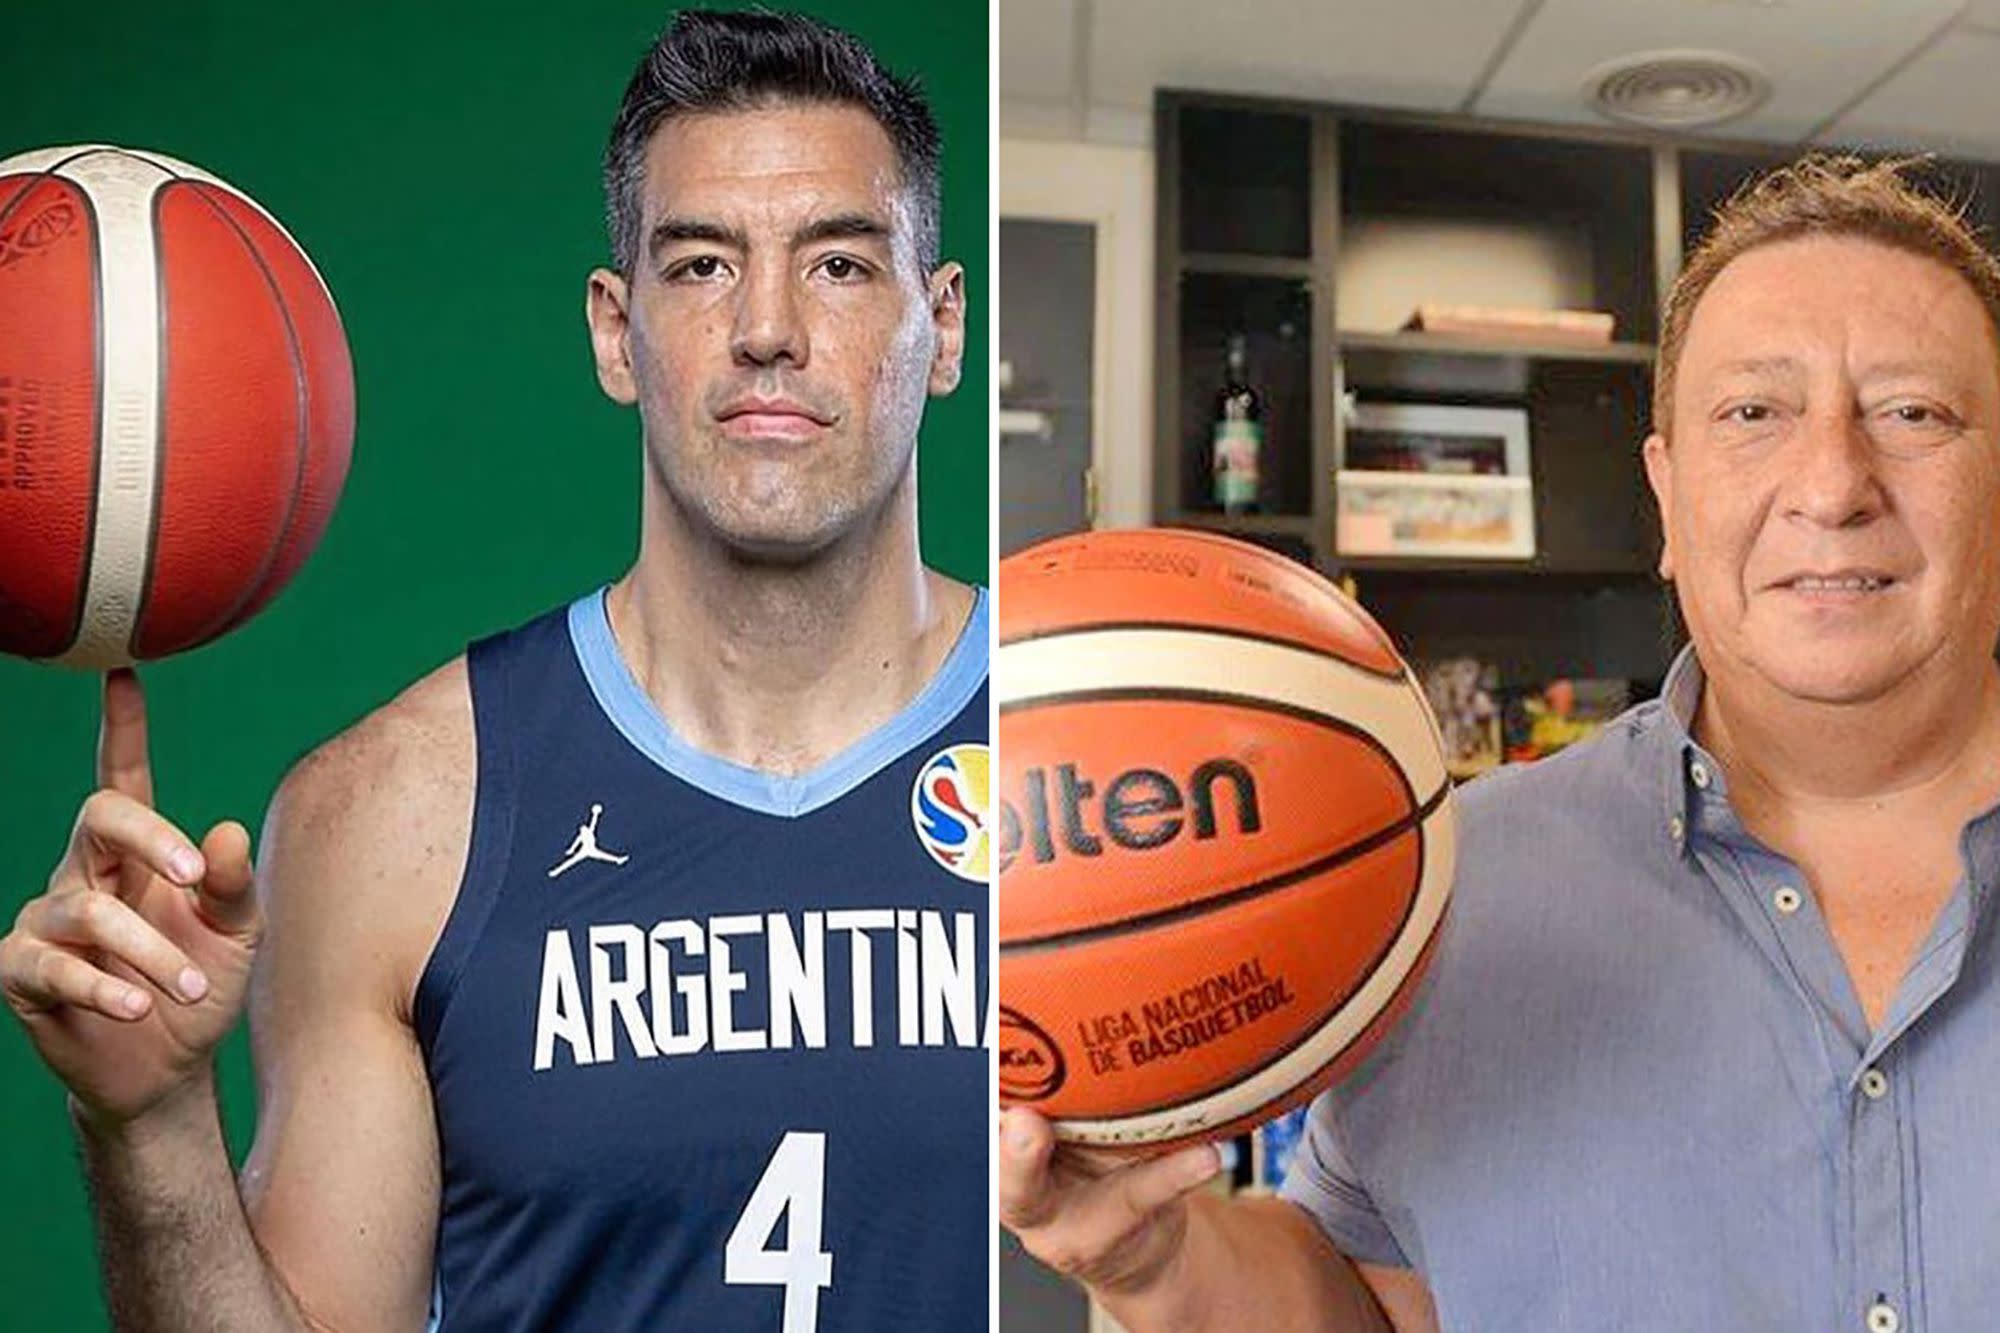 Luis Scola rises up again against the leadership of the Argentine Basketball Confederation